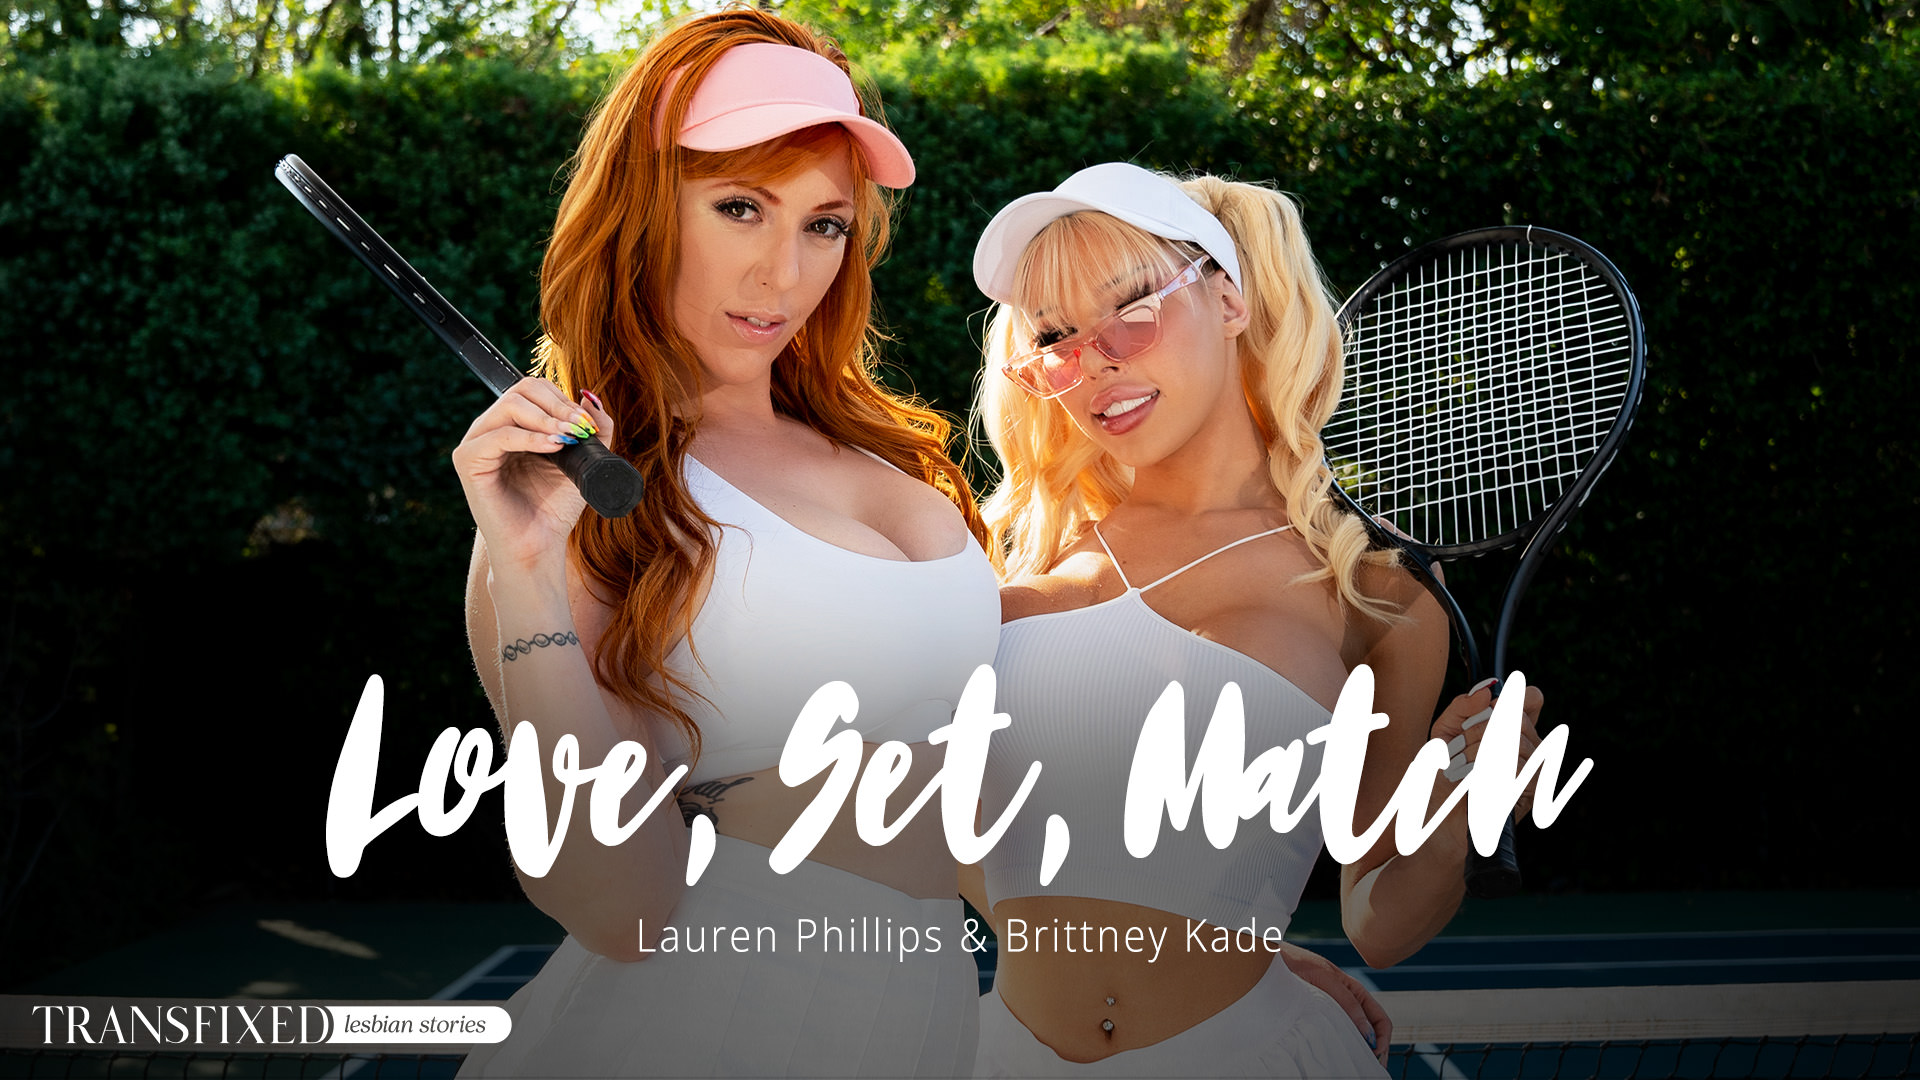 Love, Set, Match, Scene #01 with Lauren Phillips, Brittney Kade in Transfixed by Adult Time